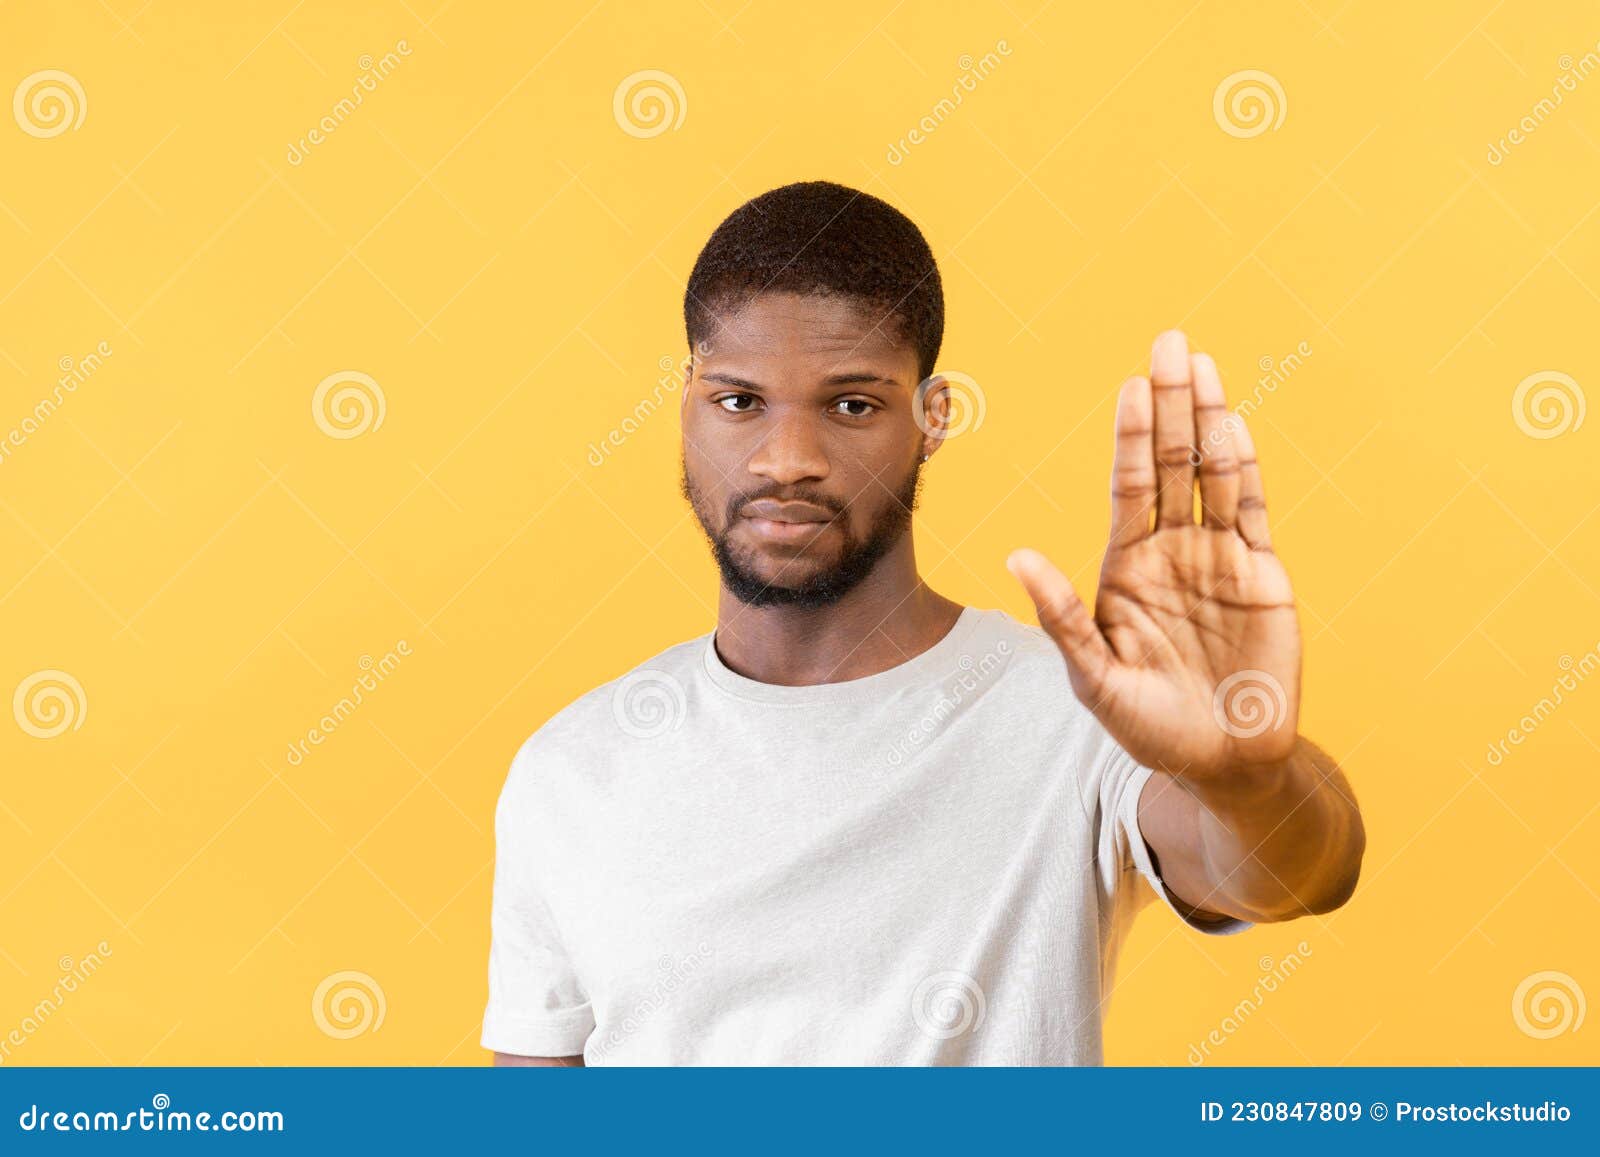 Black Male Hands Keeping in Cupped Shape, Cutout Stock Image - Image of ...